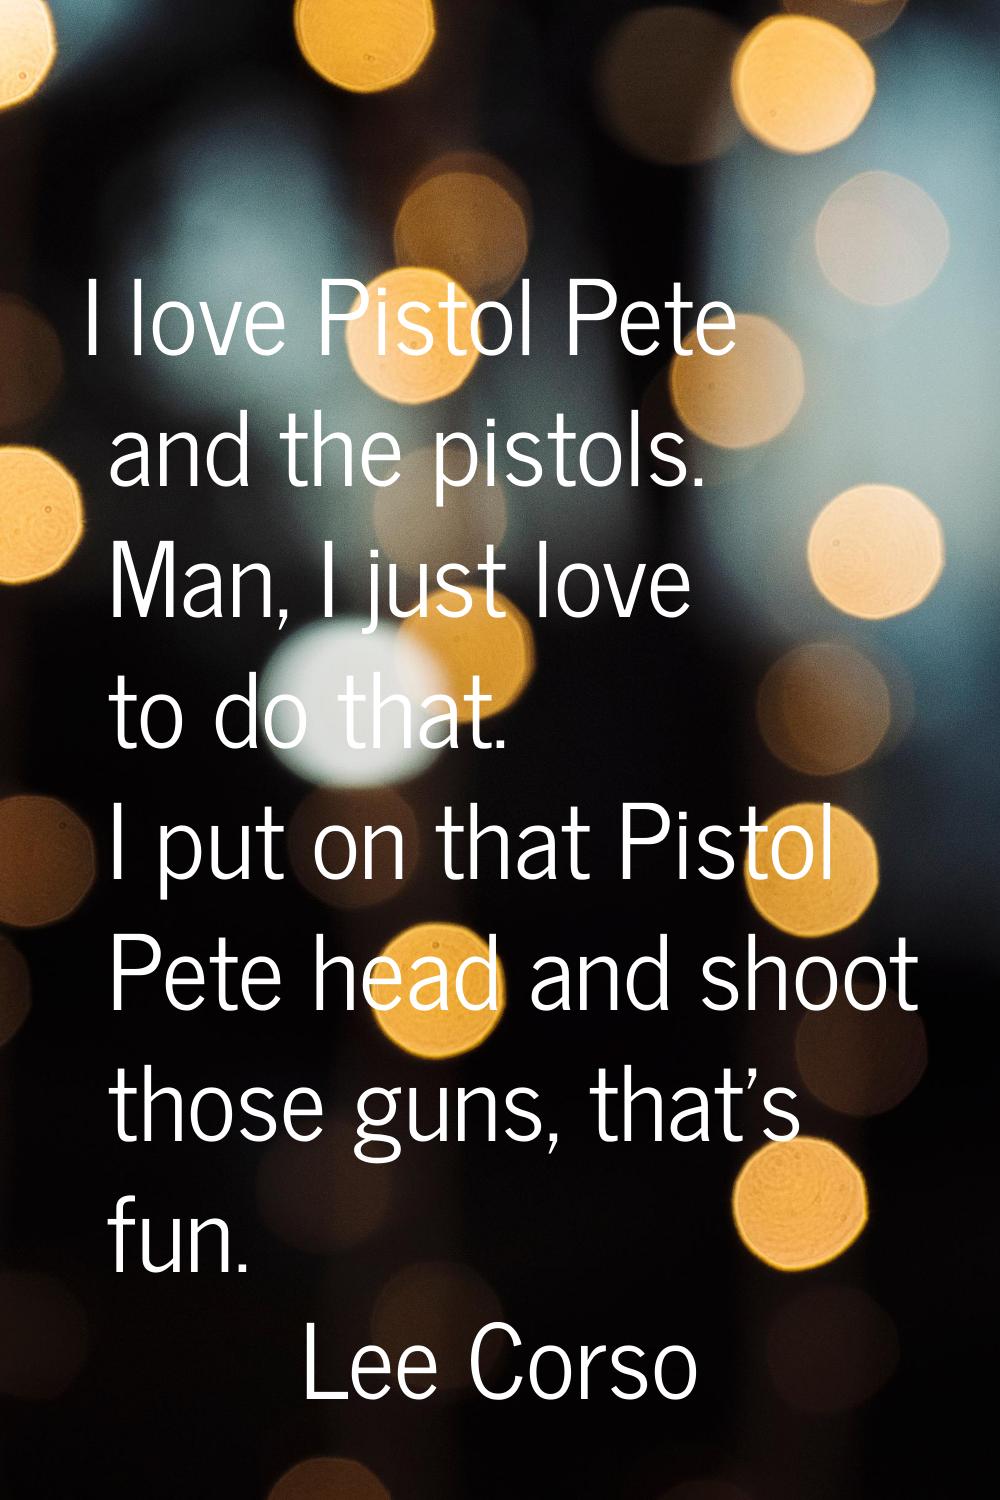 I love Pistol Pete and the pistols. Man, I just love to do that. I put on that Pistol Pete head and